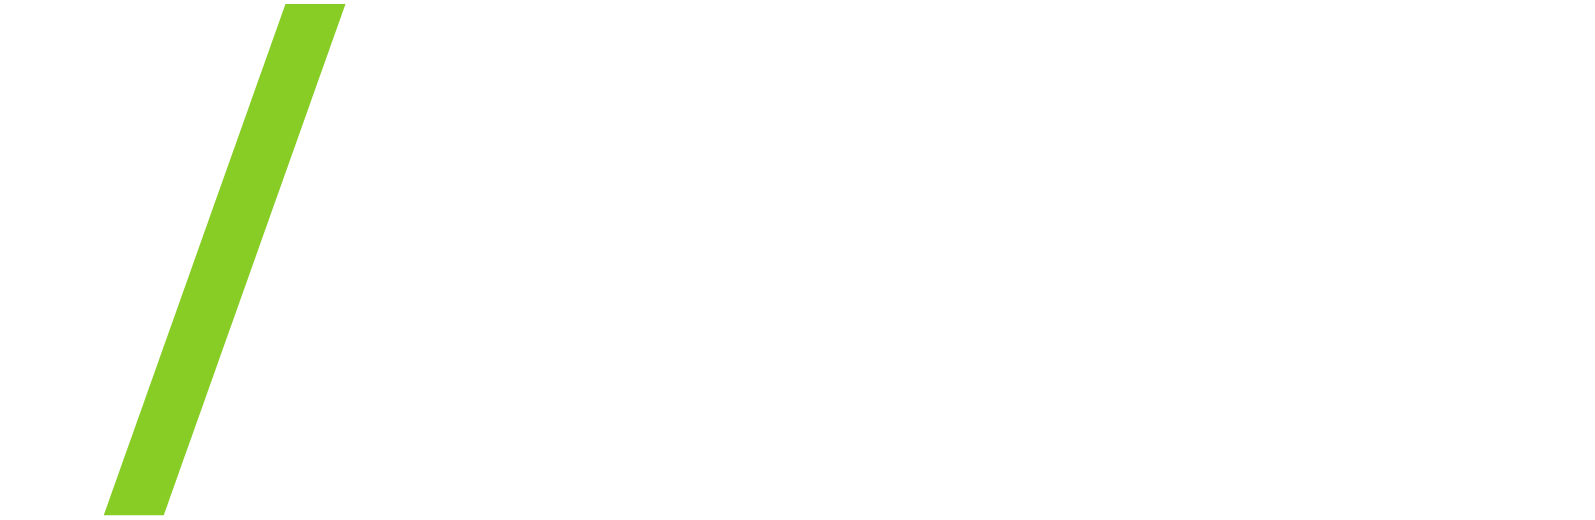 Advanced Drainage Systems
 logo for dark backgrounds (transparent PNG)